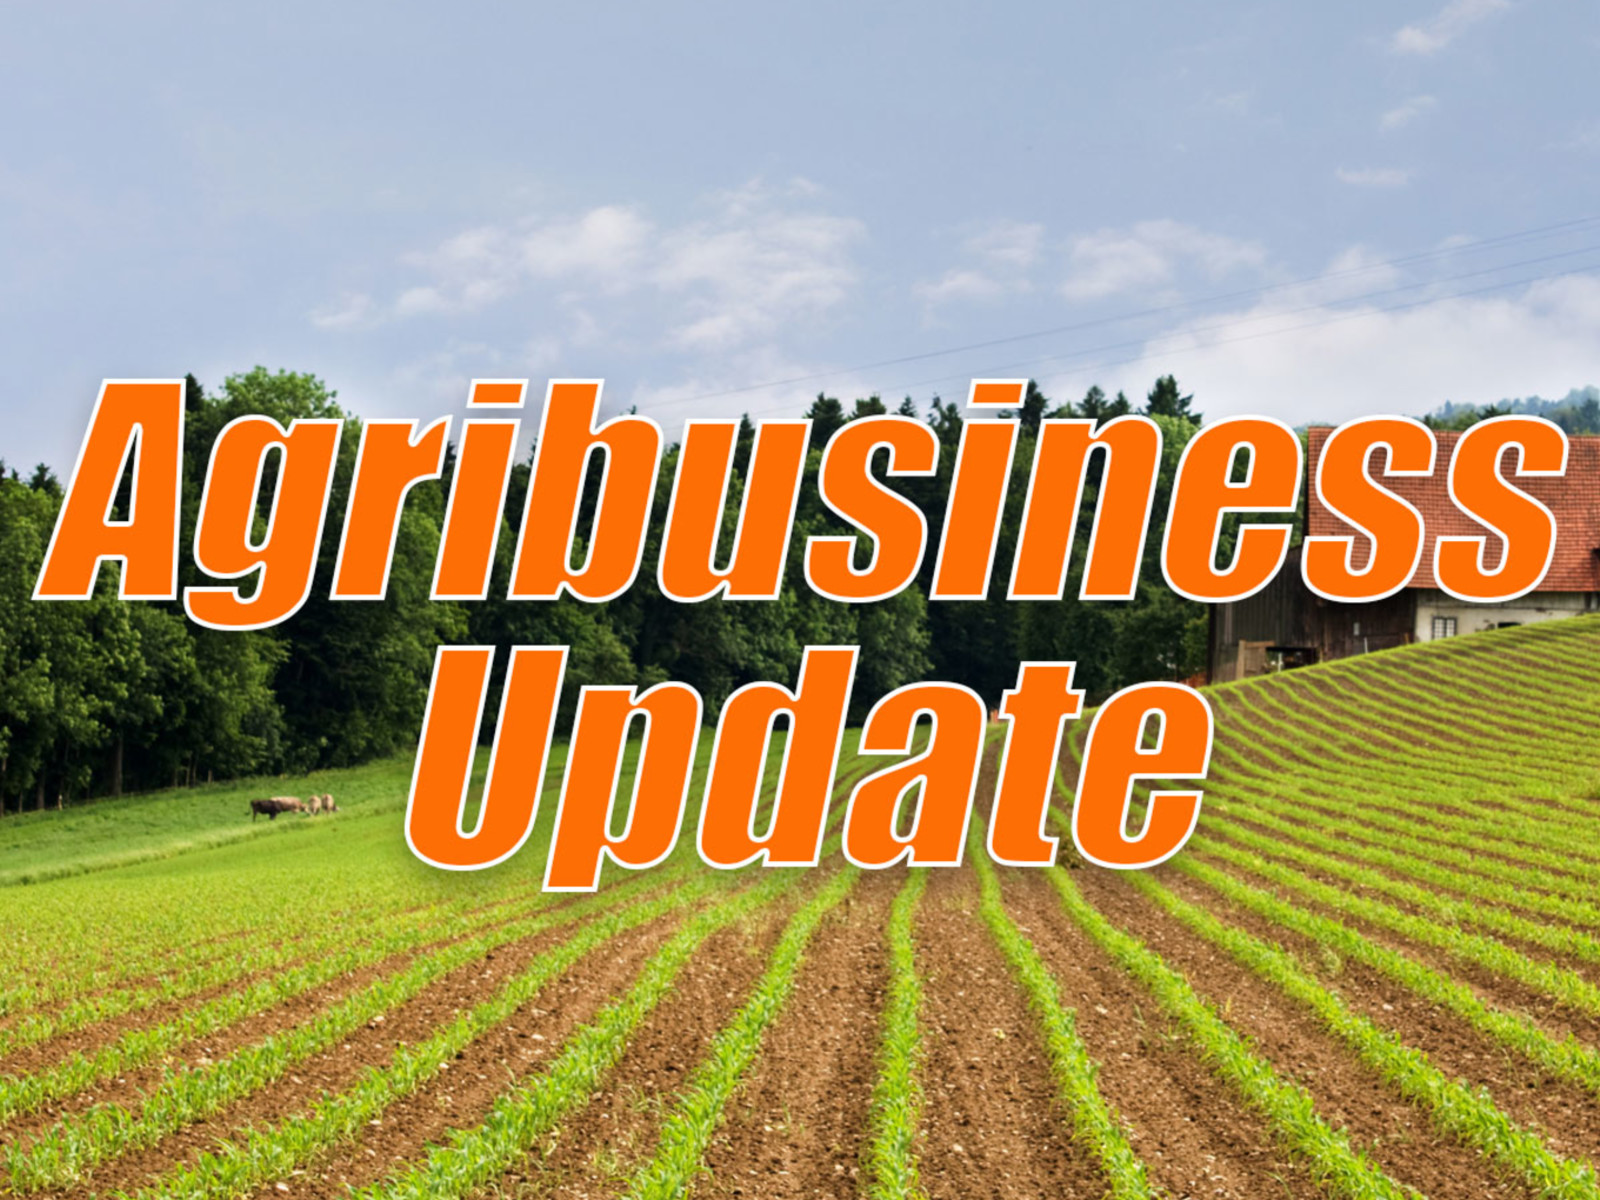 USDA Funding Supply Chain Improvement and World Ag Output Down